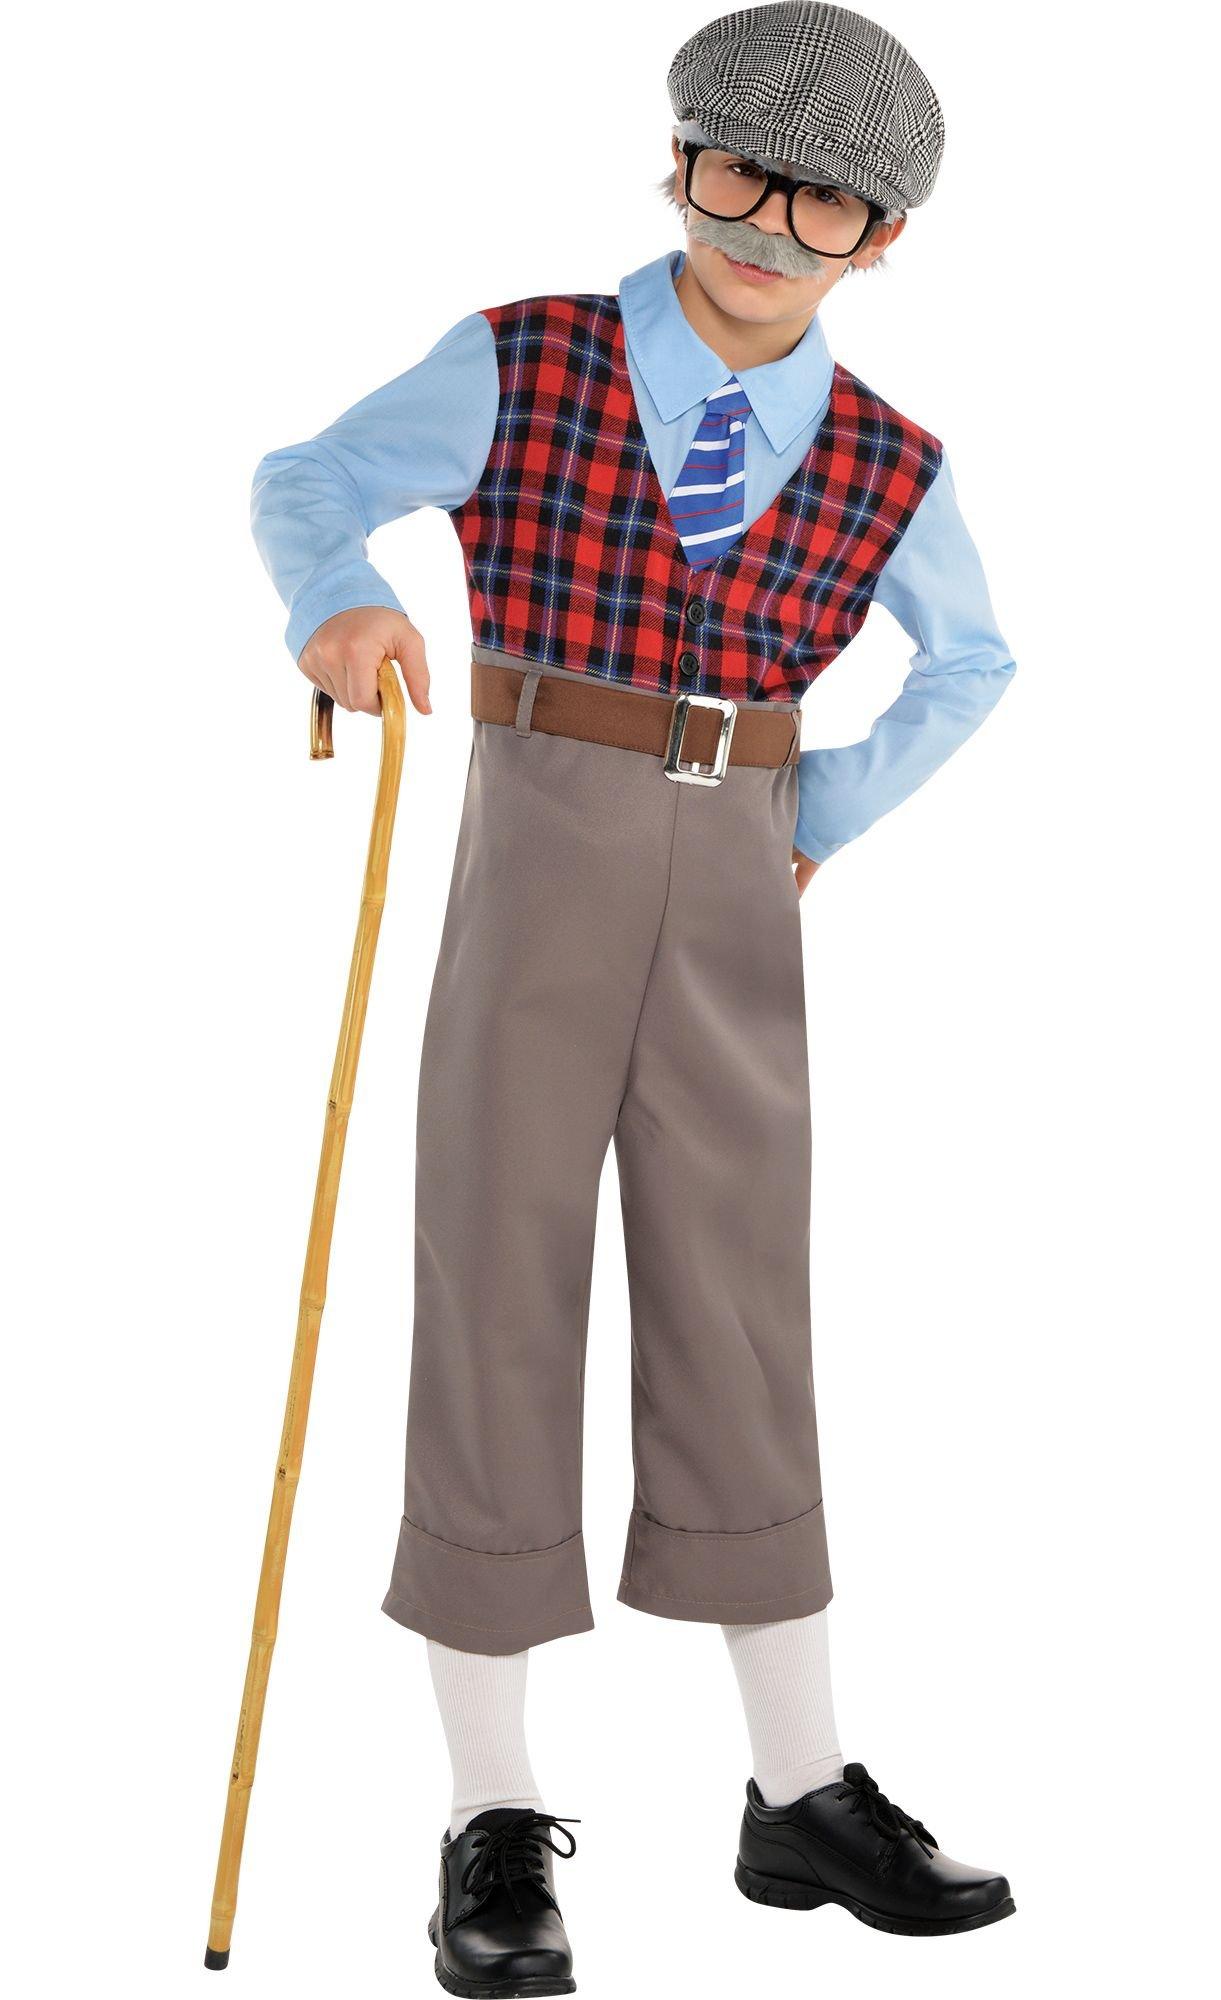 Boys Old Geezer Costume | Party City